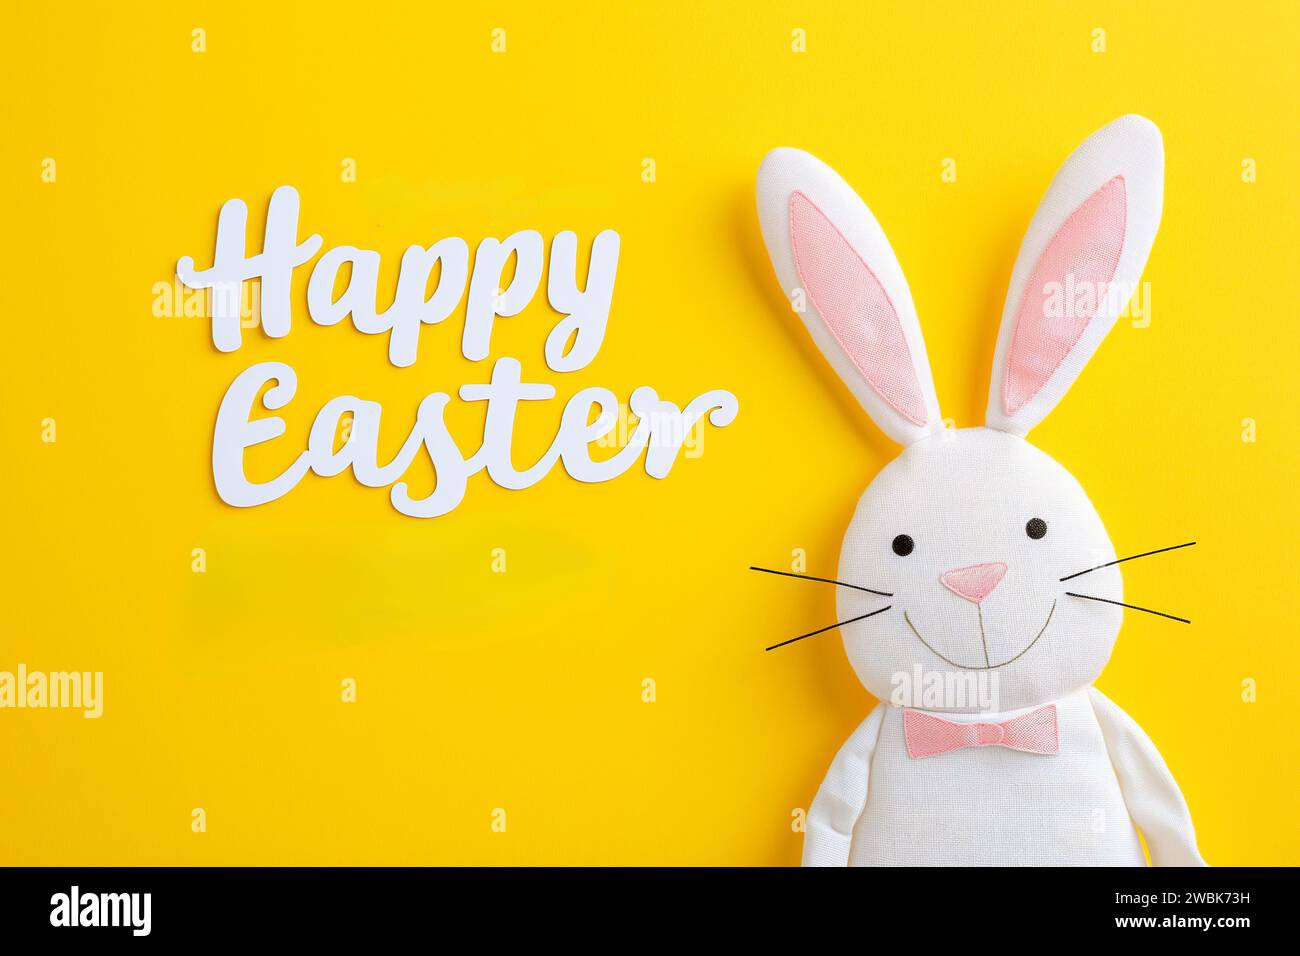 Happy easter, Happy Easter Greeting with Cartoon Bunny on Bright Yellow Background and Playful White Cursive Font Stock Photo